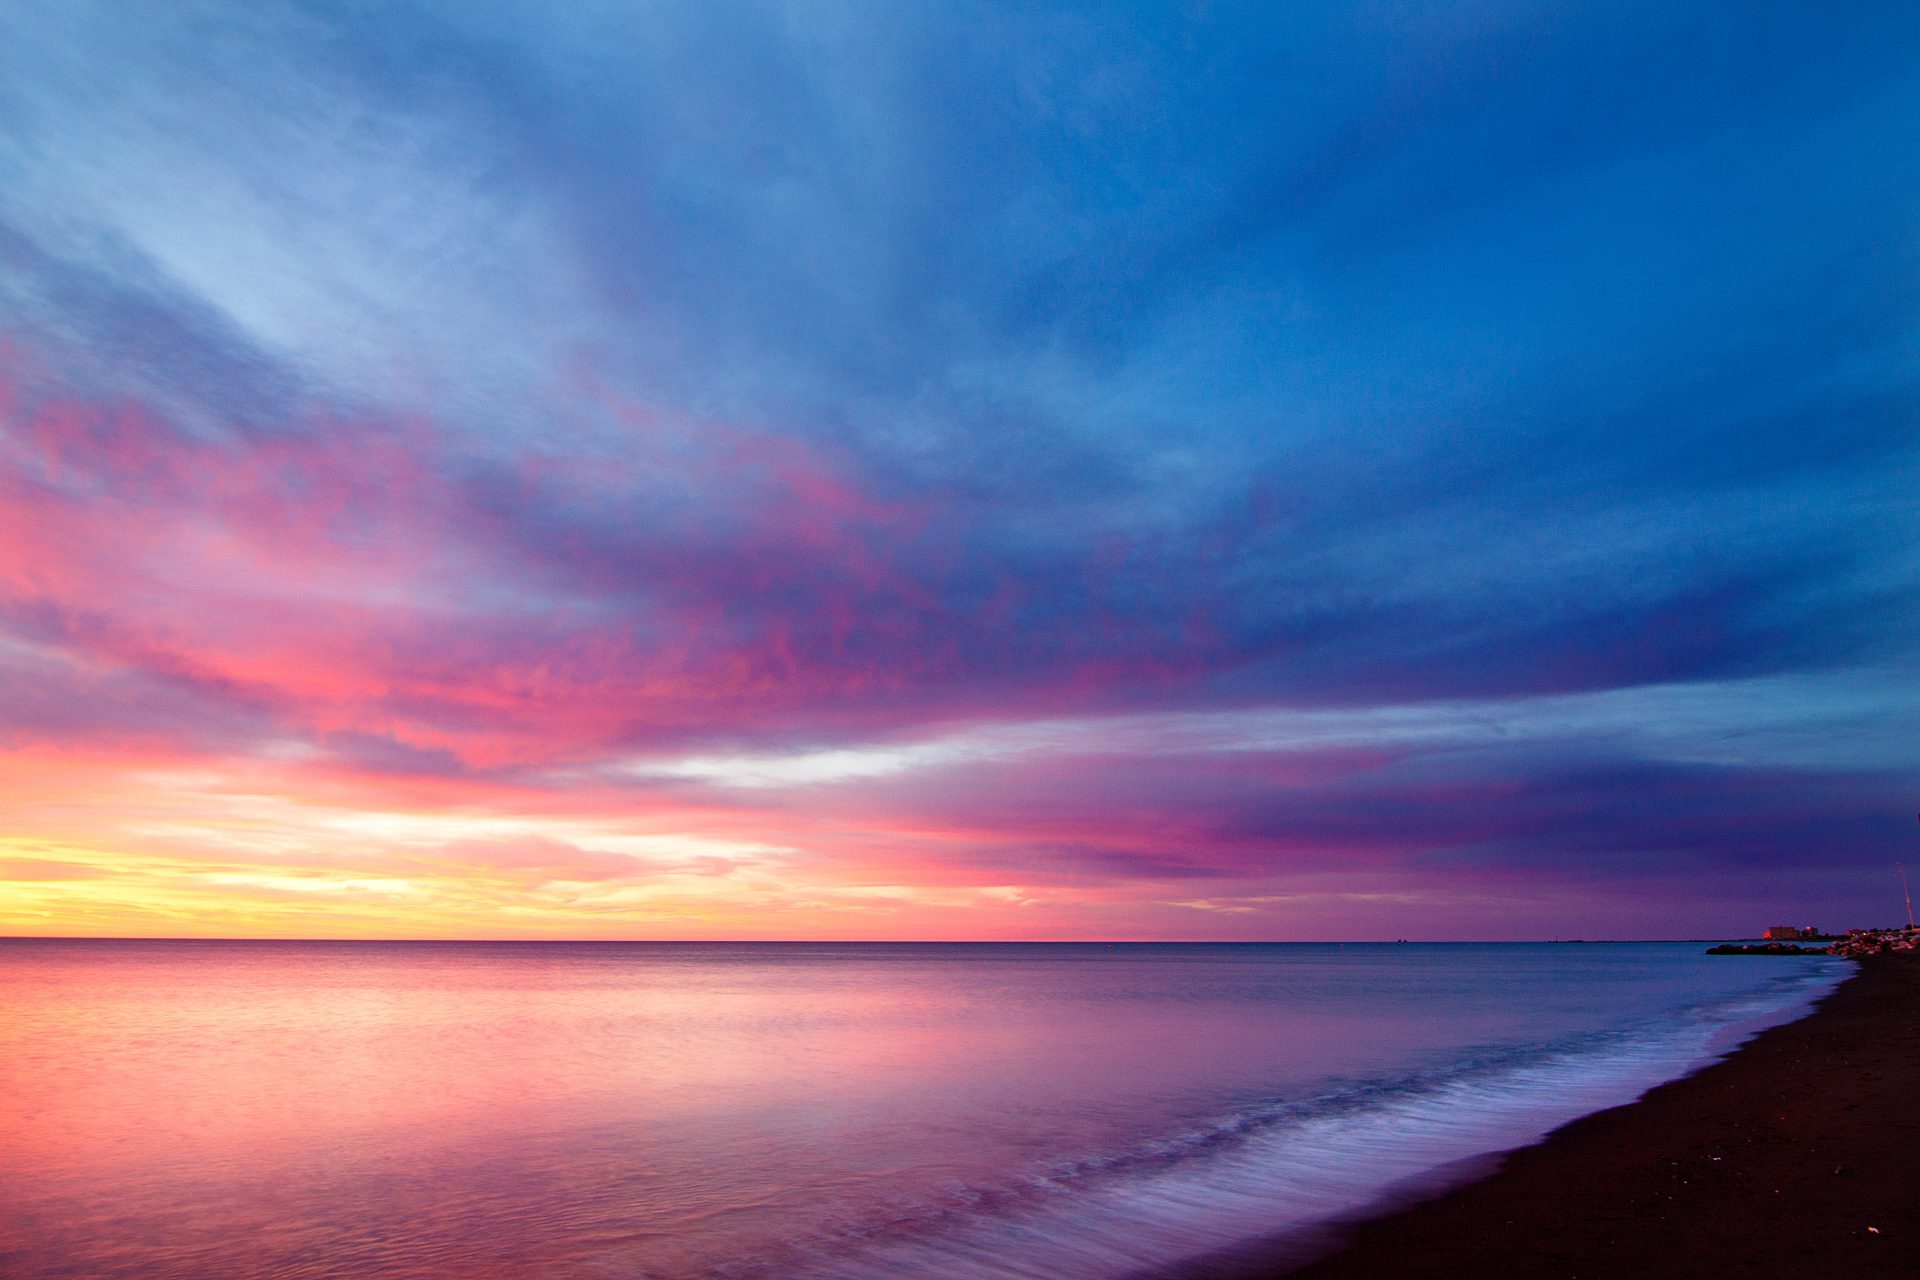 A sunset over the ocean with pink and blue clouds.